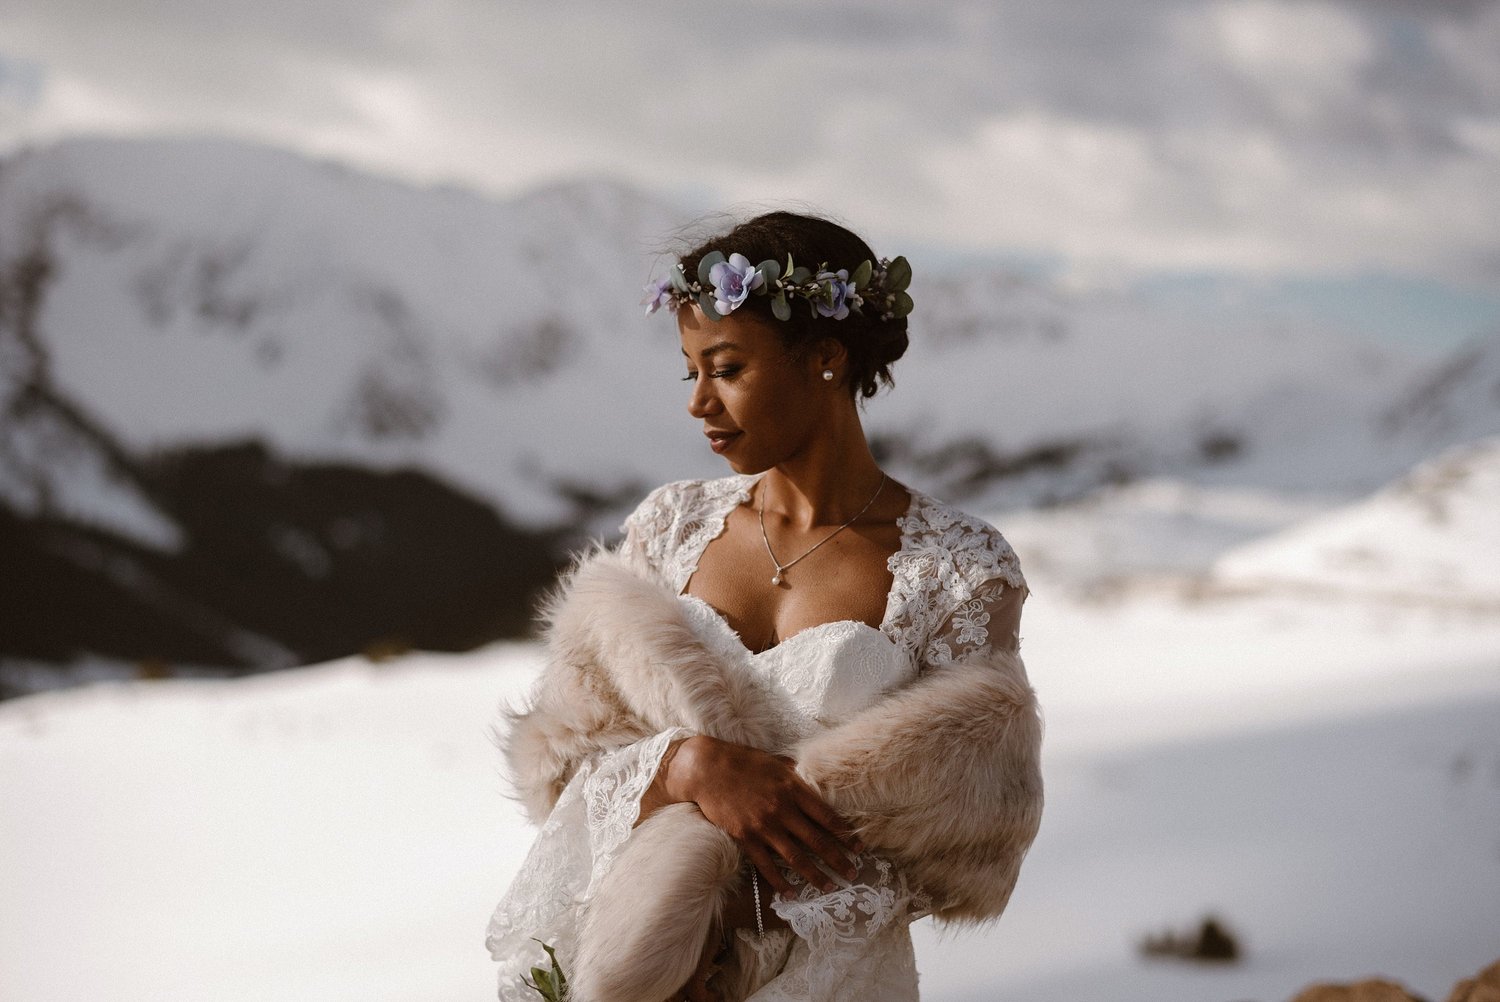 Bride on her elopement day at Loveland Pass, in Colorado. She is  looking down, wearing a purple flower crown, white dress, and a fur shawl. There are snow-capped mountains in the background. 